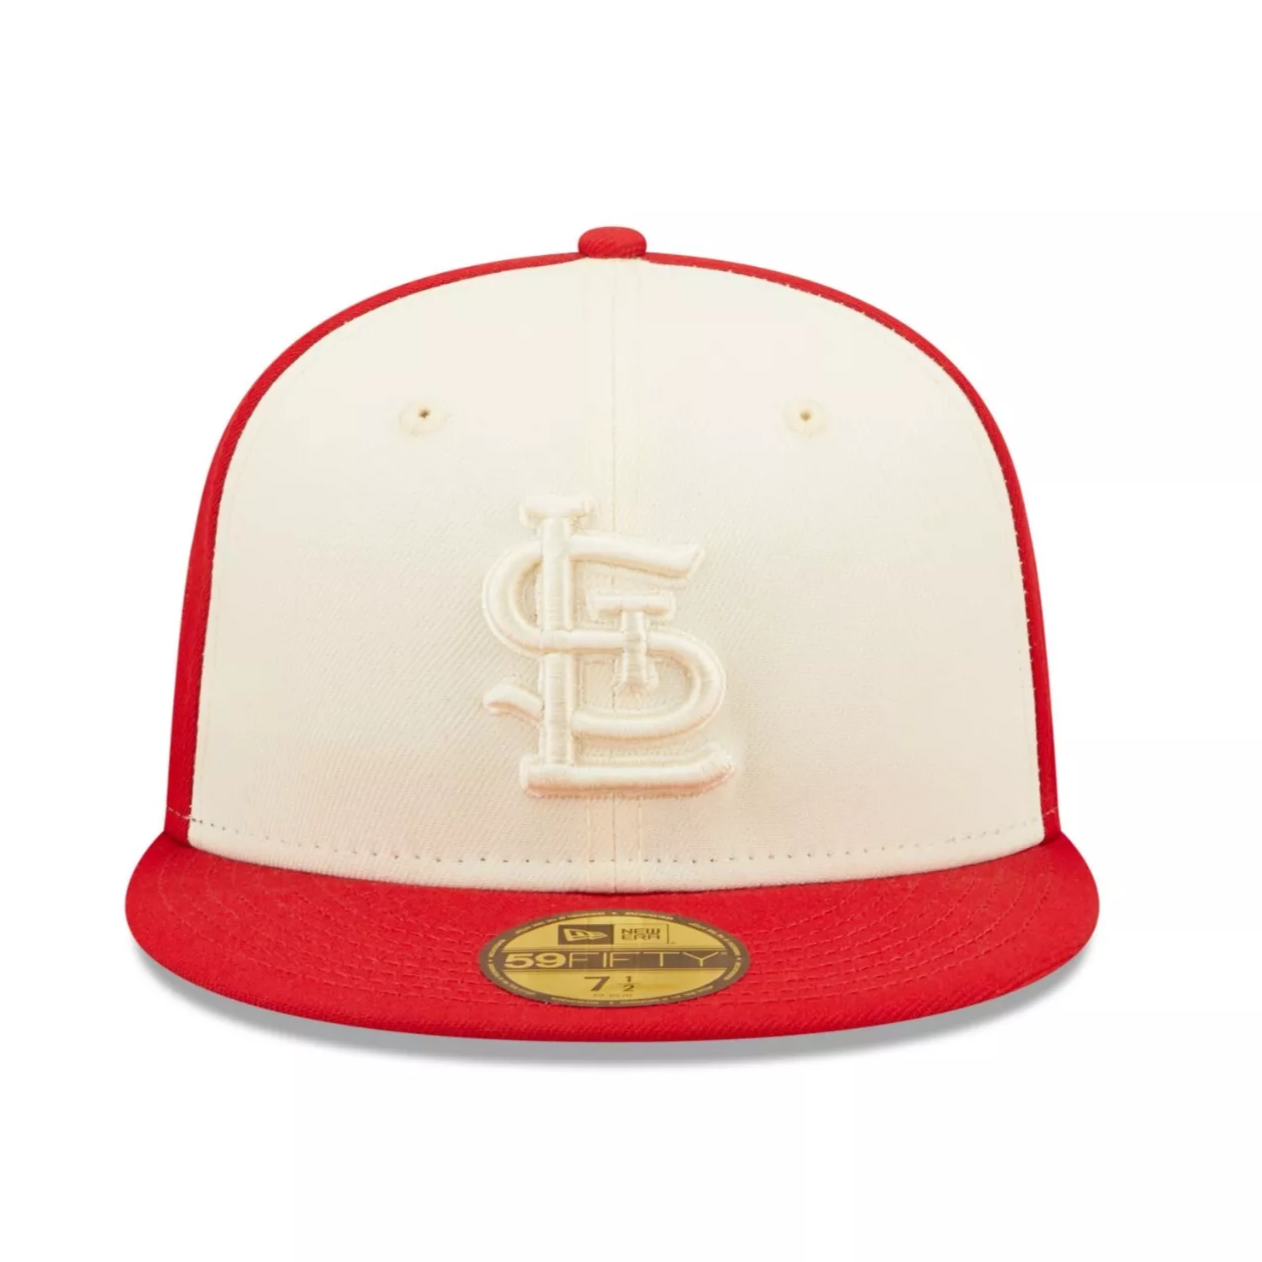 NEW ERA ST LOUIS CARDINALS 2-TONE 59FIFTY FITTED HAT- RED/CREAM